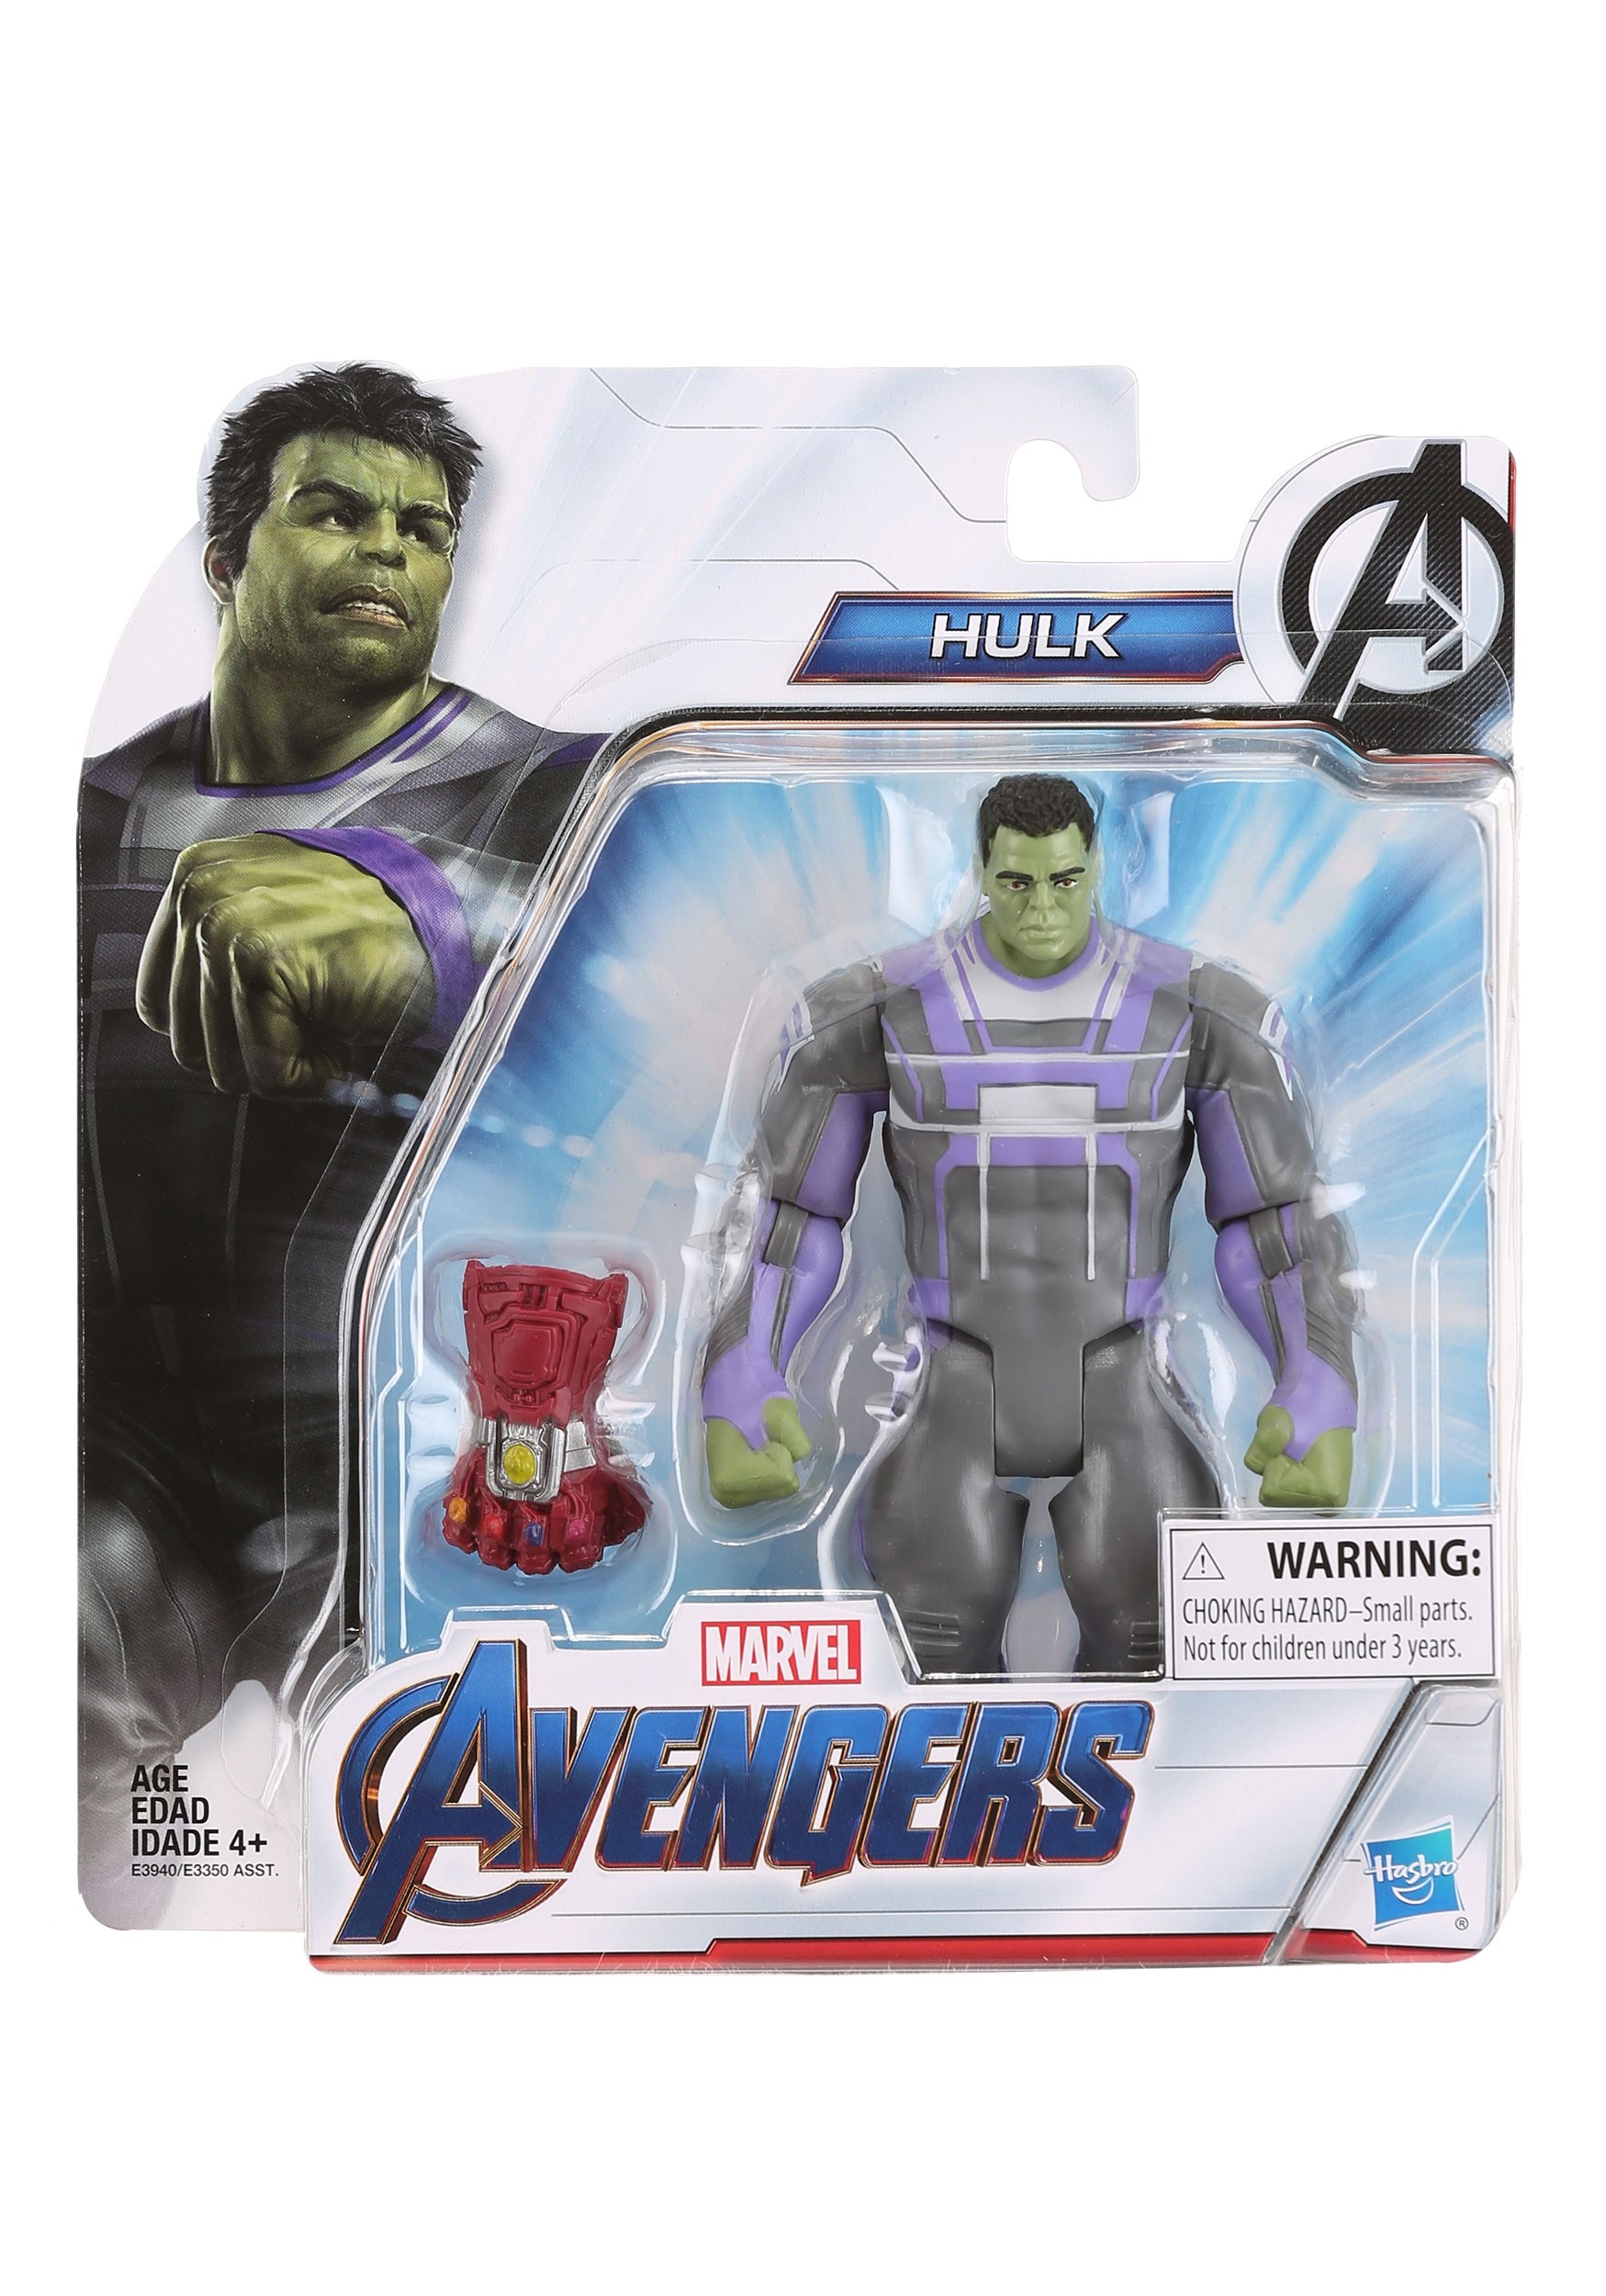 AVENGERS End Game  MOVIE Hulk team Suit 6 inch Deluxe  Figure HASBRO TOY NEW! 